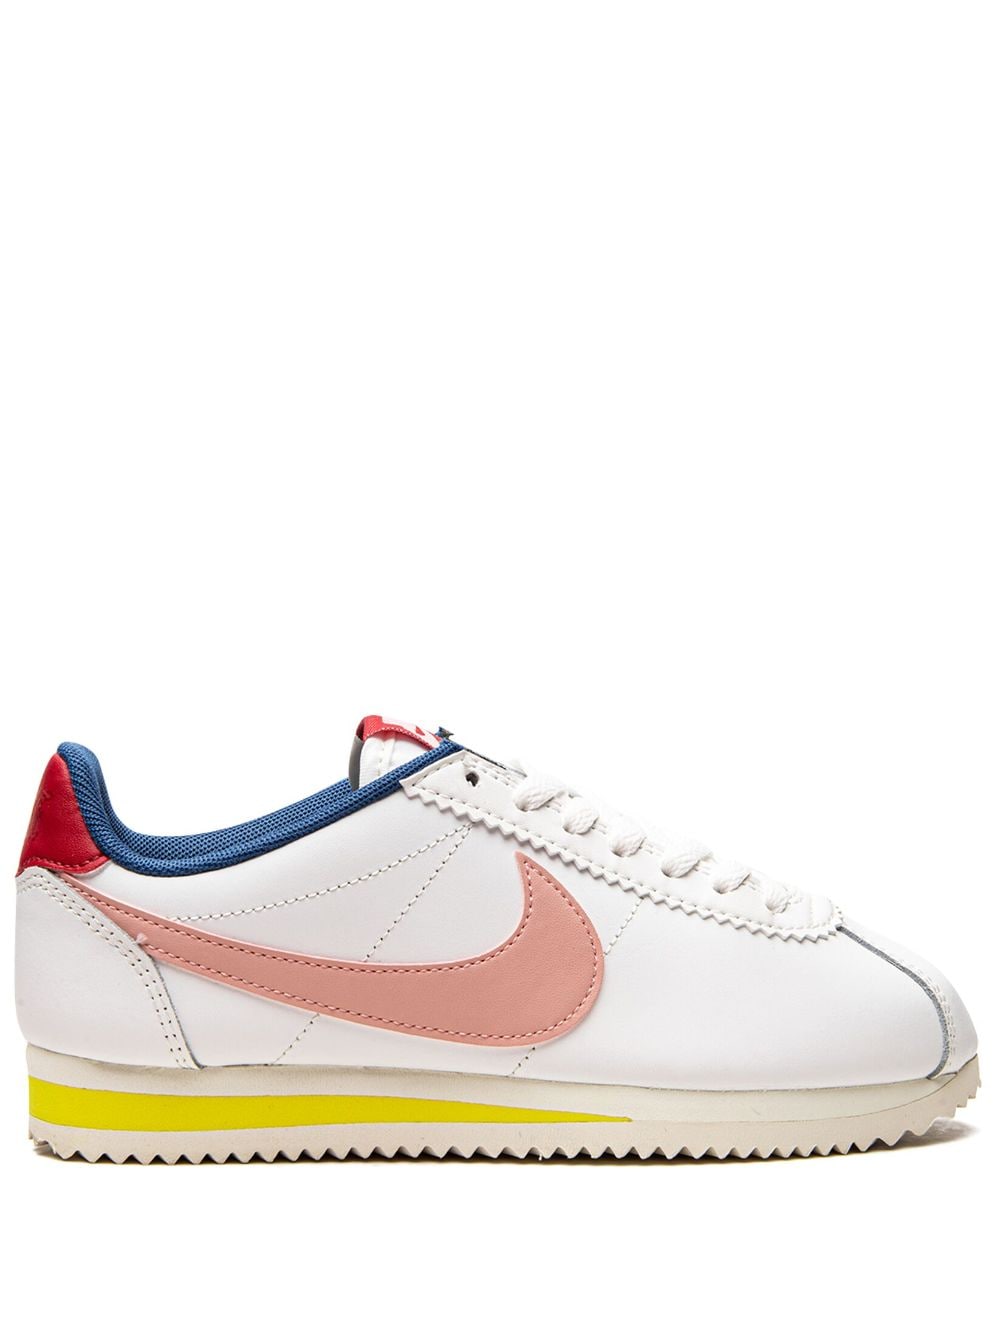 Nike Classic Cortez Leather Trainers In White